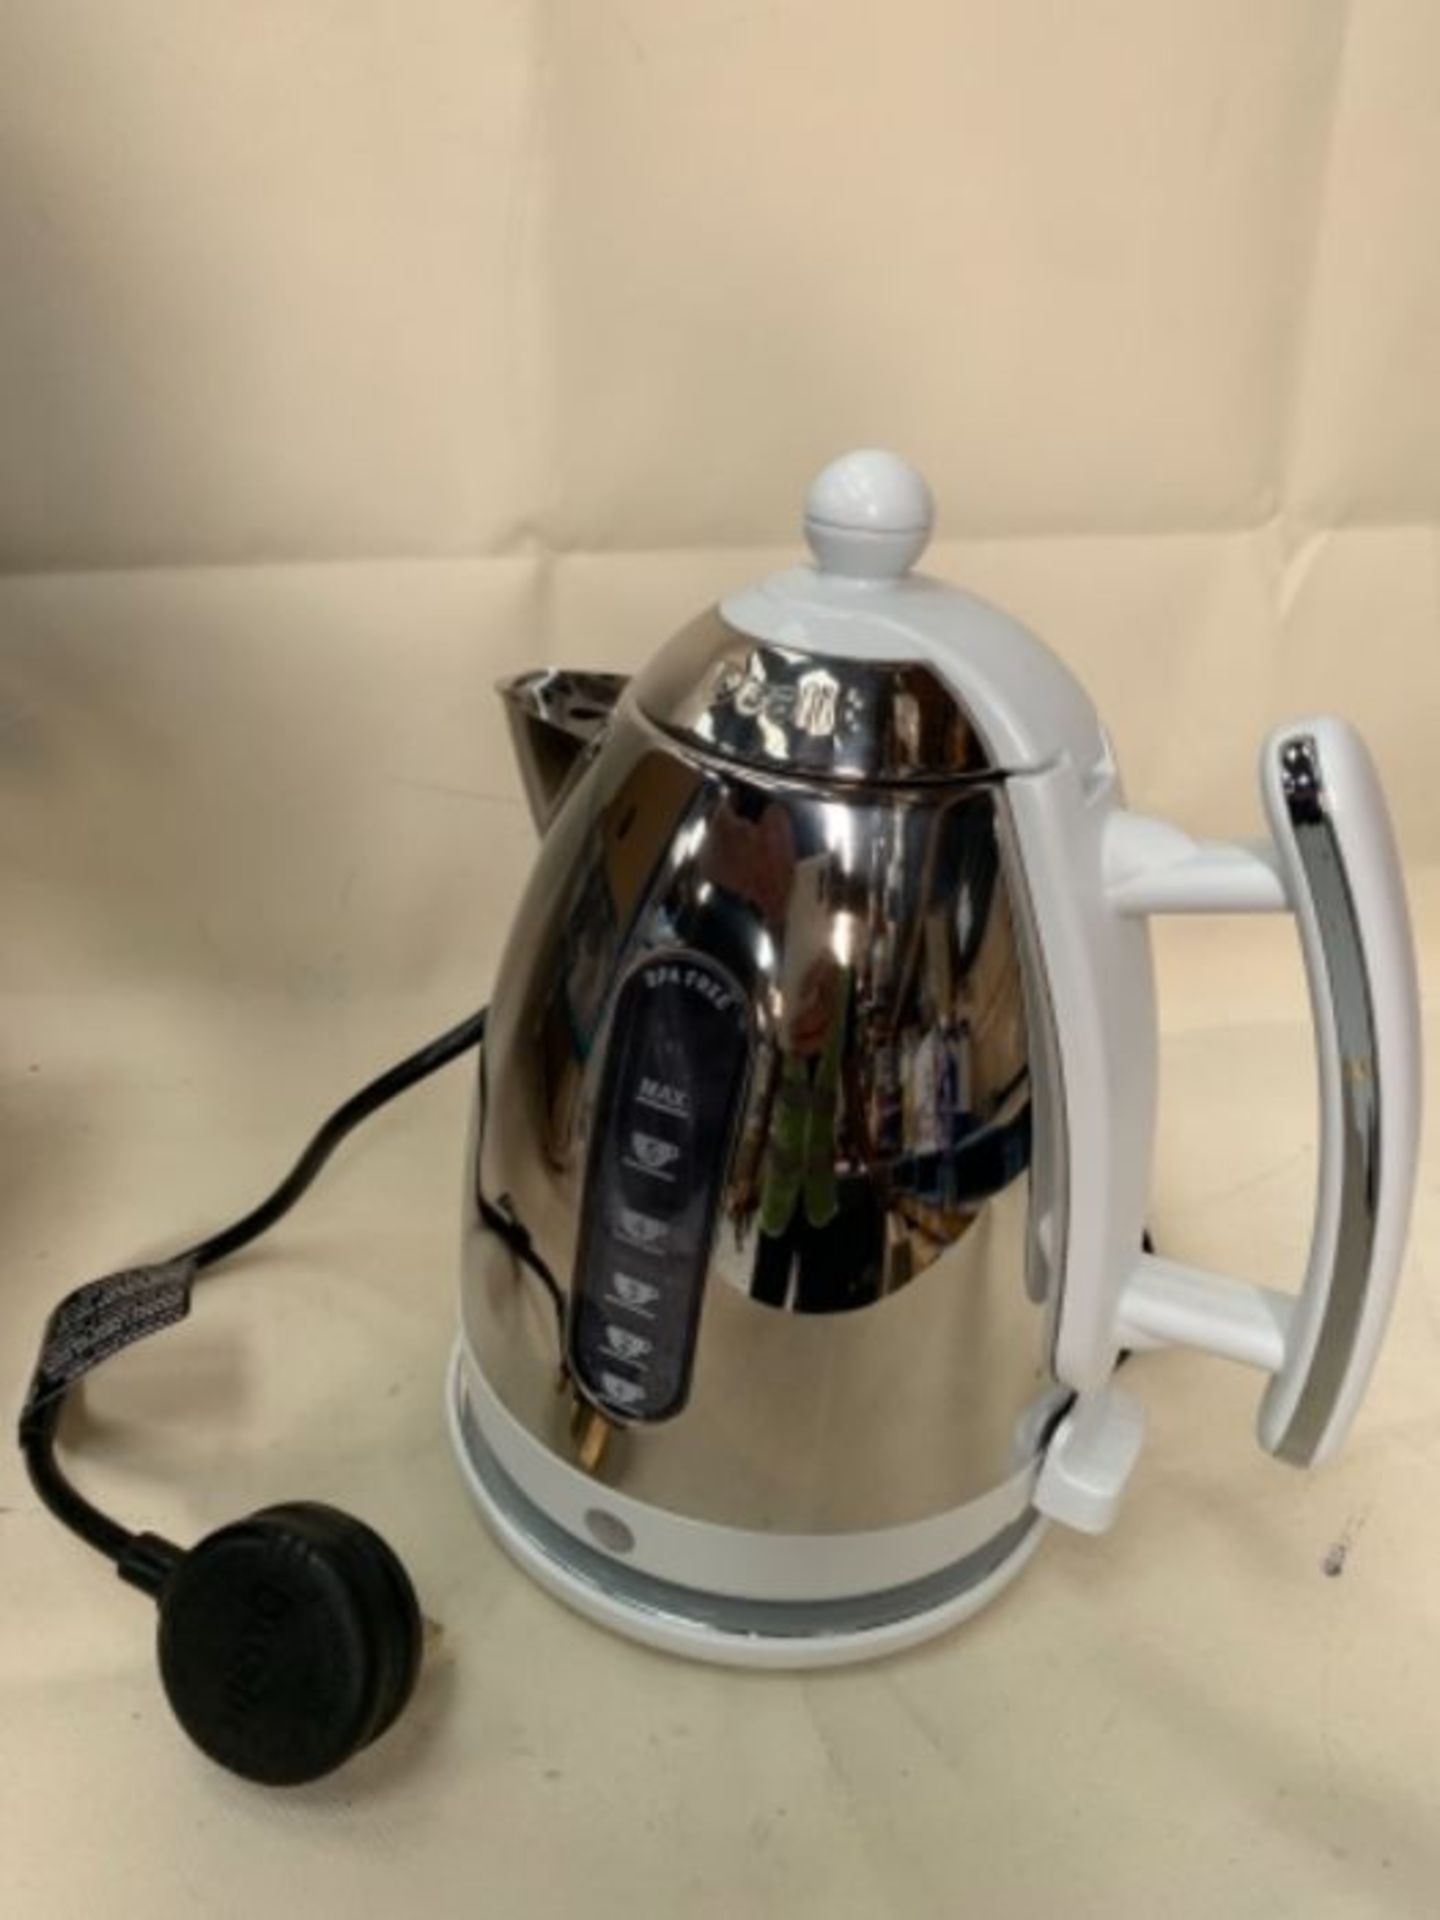 RRP £84.00 Dualit Lite Kettle - 1.5L Jug Kettle - Polished with Gloss White, High Gloss Finish - - Image 2 of 2